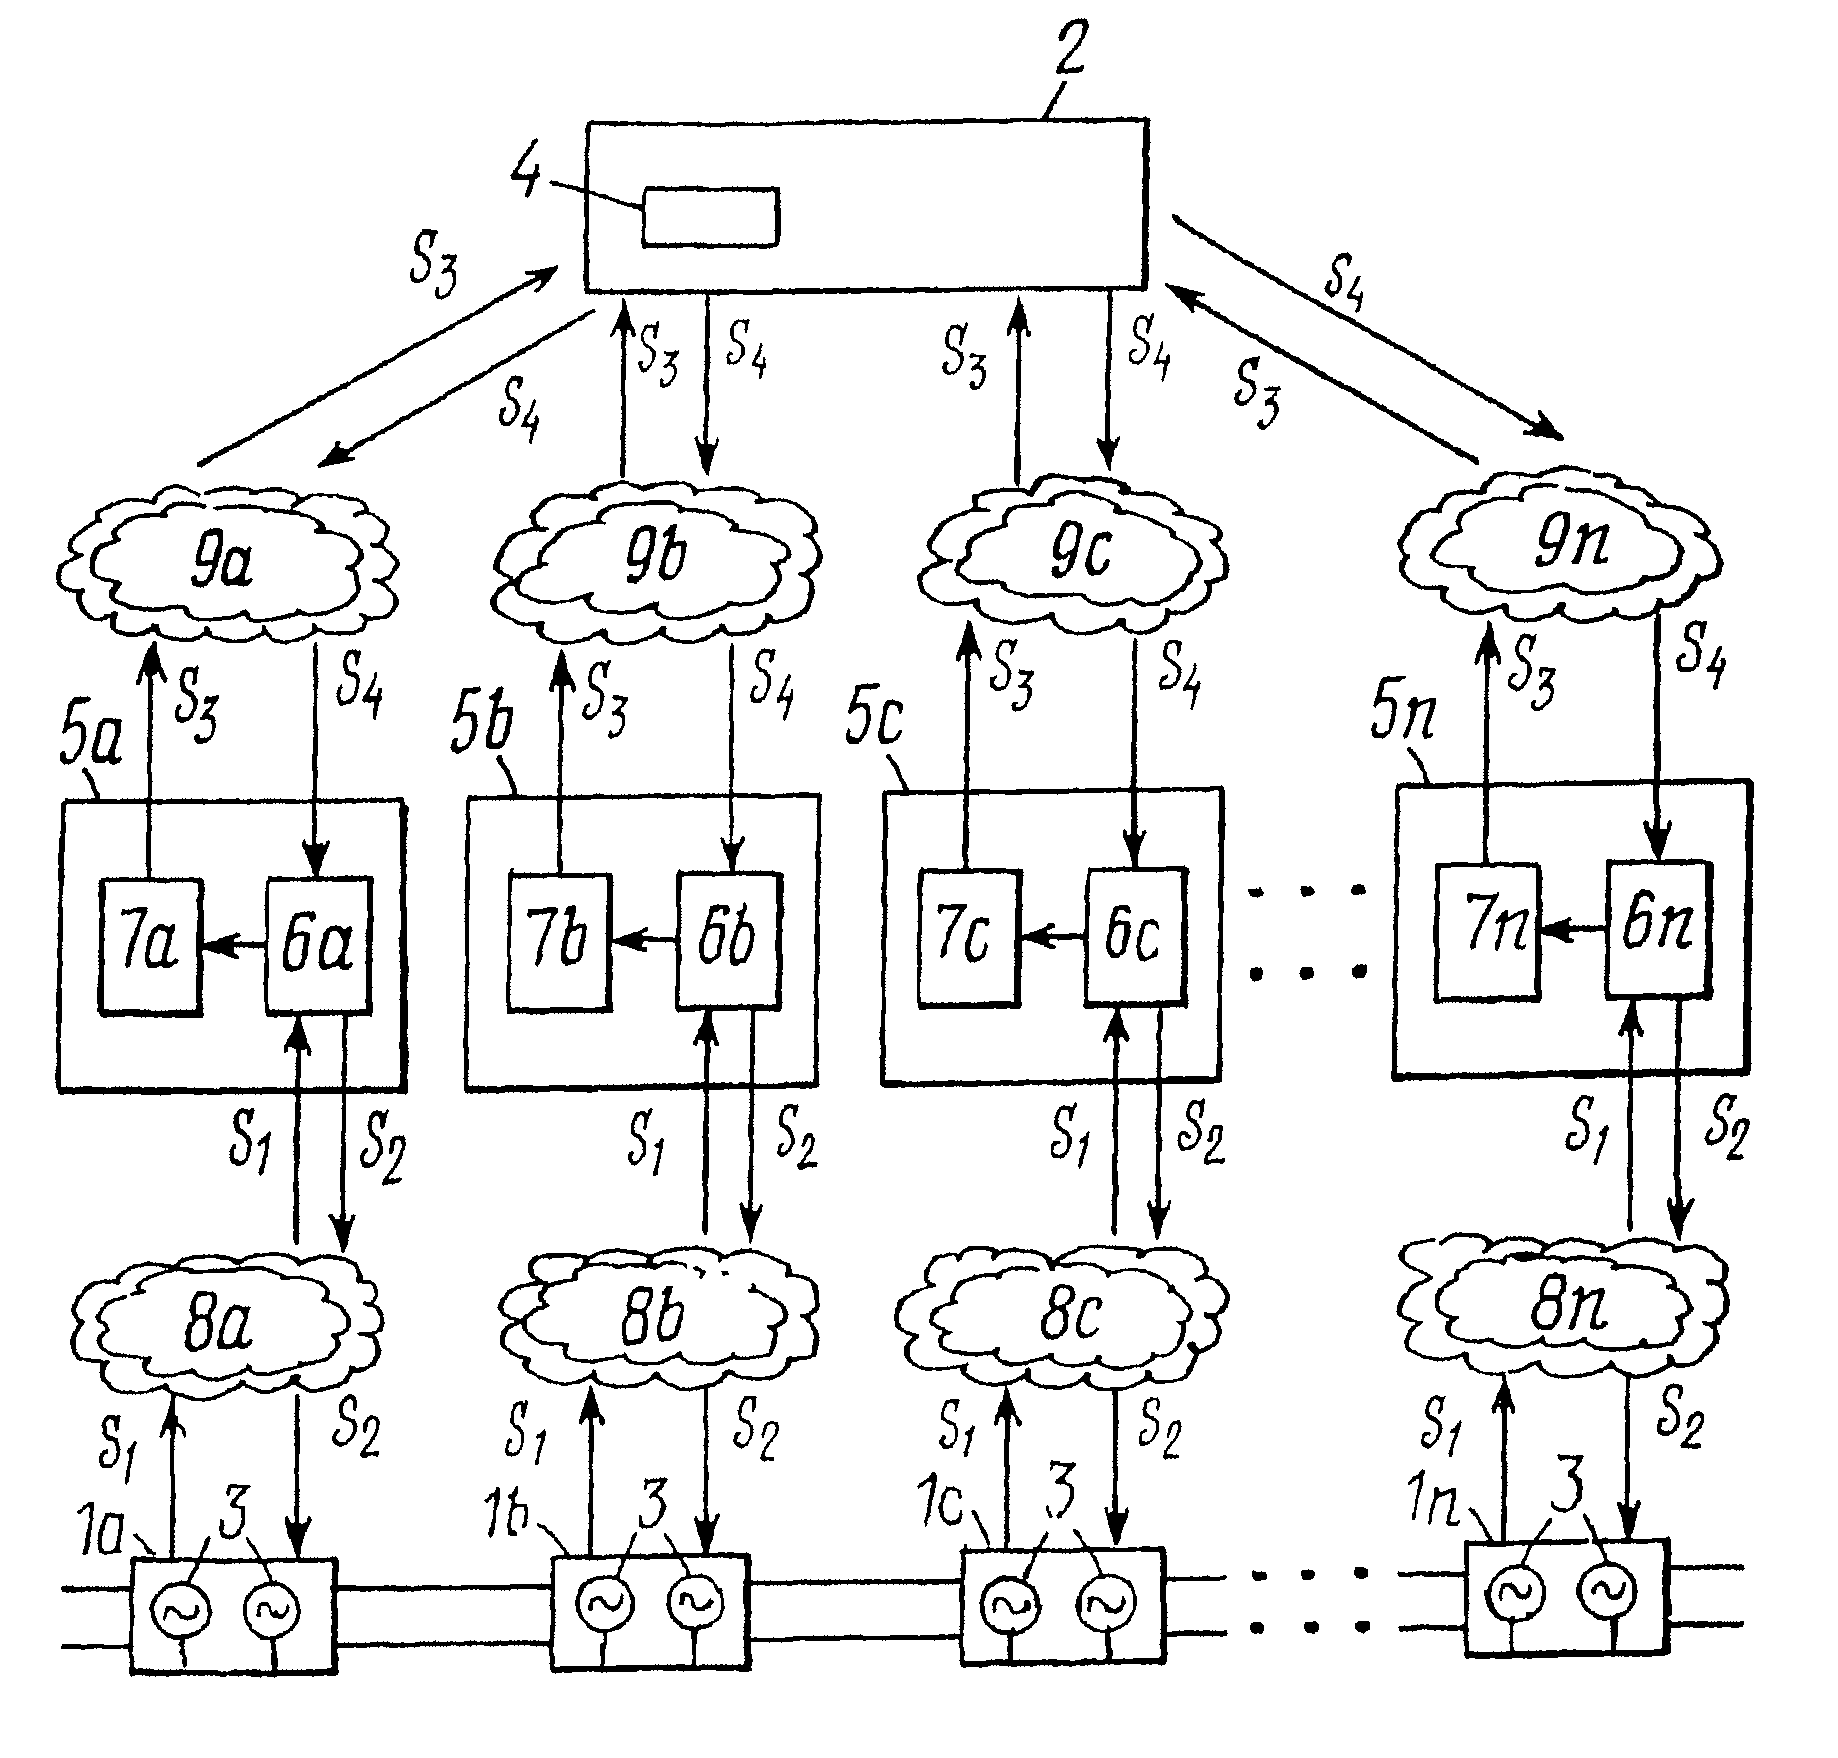 System for dispatching and controlling of generation in large-scale electric power systems